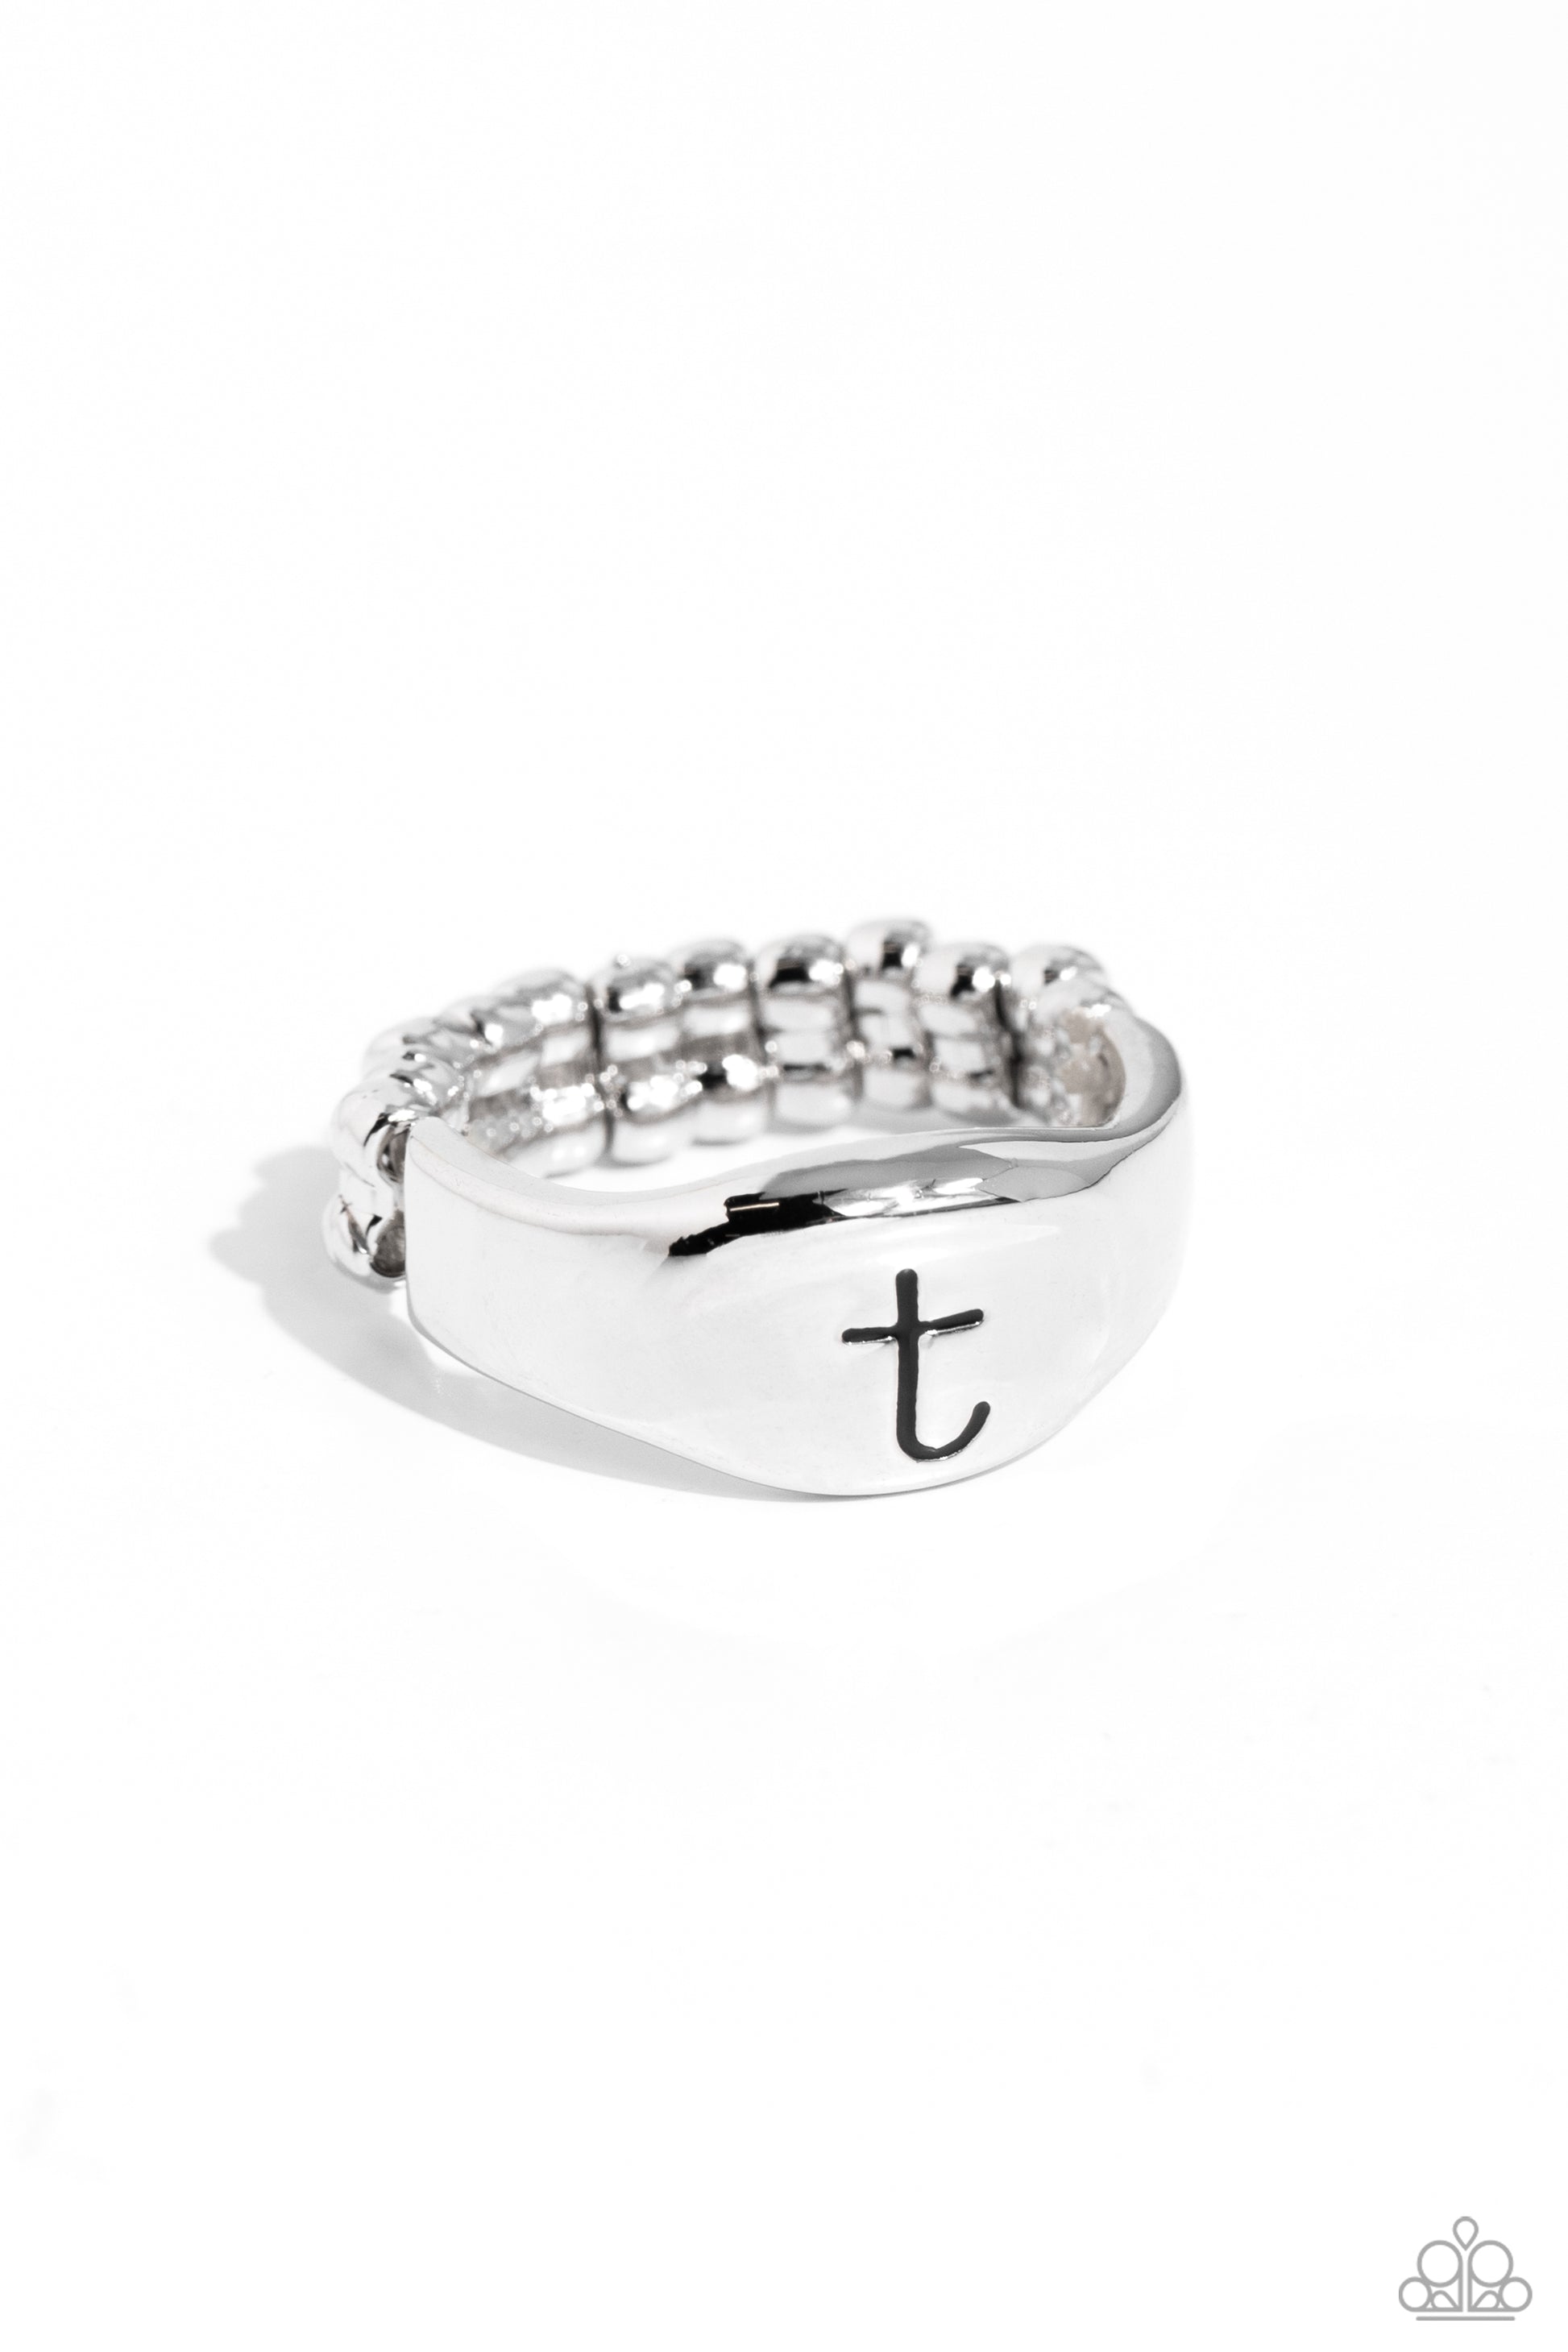 <p>Pressed into the center of a beveled silver band, the black letter "t" stands out for a simple, sentimental centerpiece. Features a stretchy band for a flexible fit.</p> <p><i> Sold as one individual ring.</i></p>